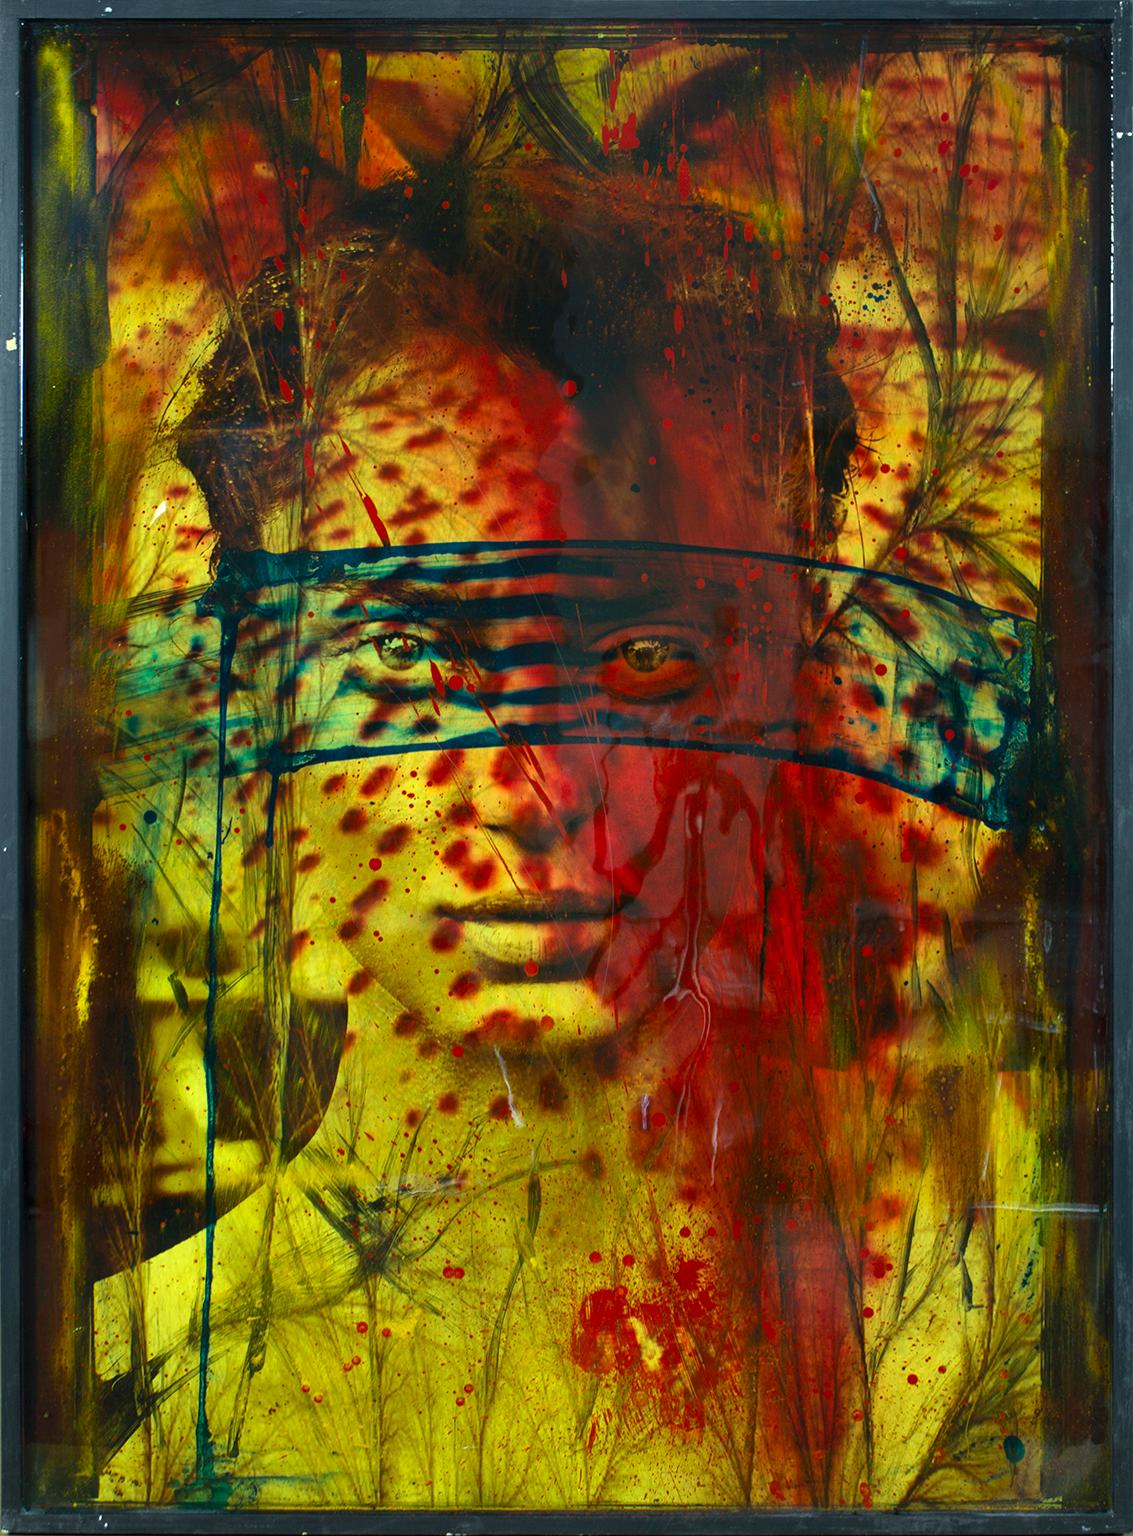 "Catrinel Ultima Estate" archival print and mixed media in resin by Mazzucco